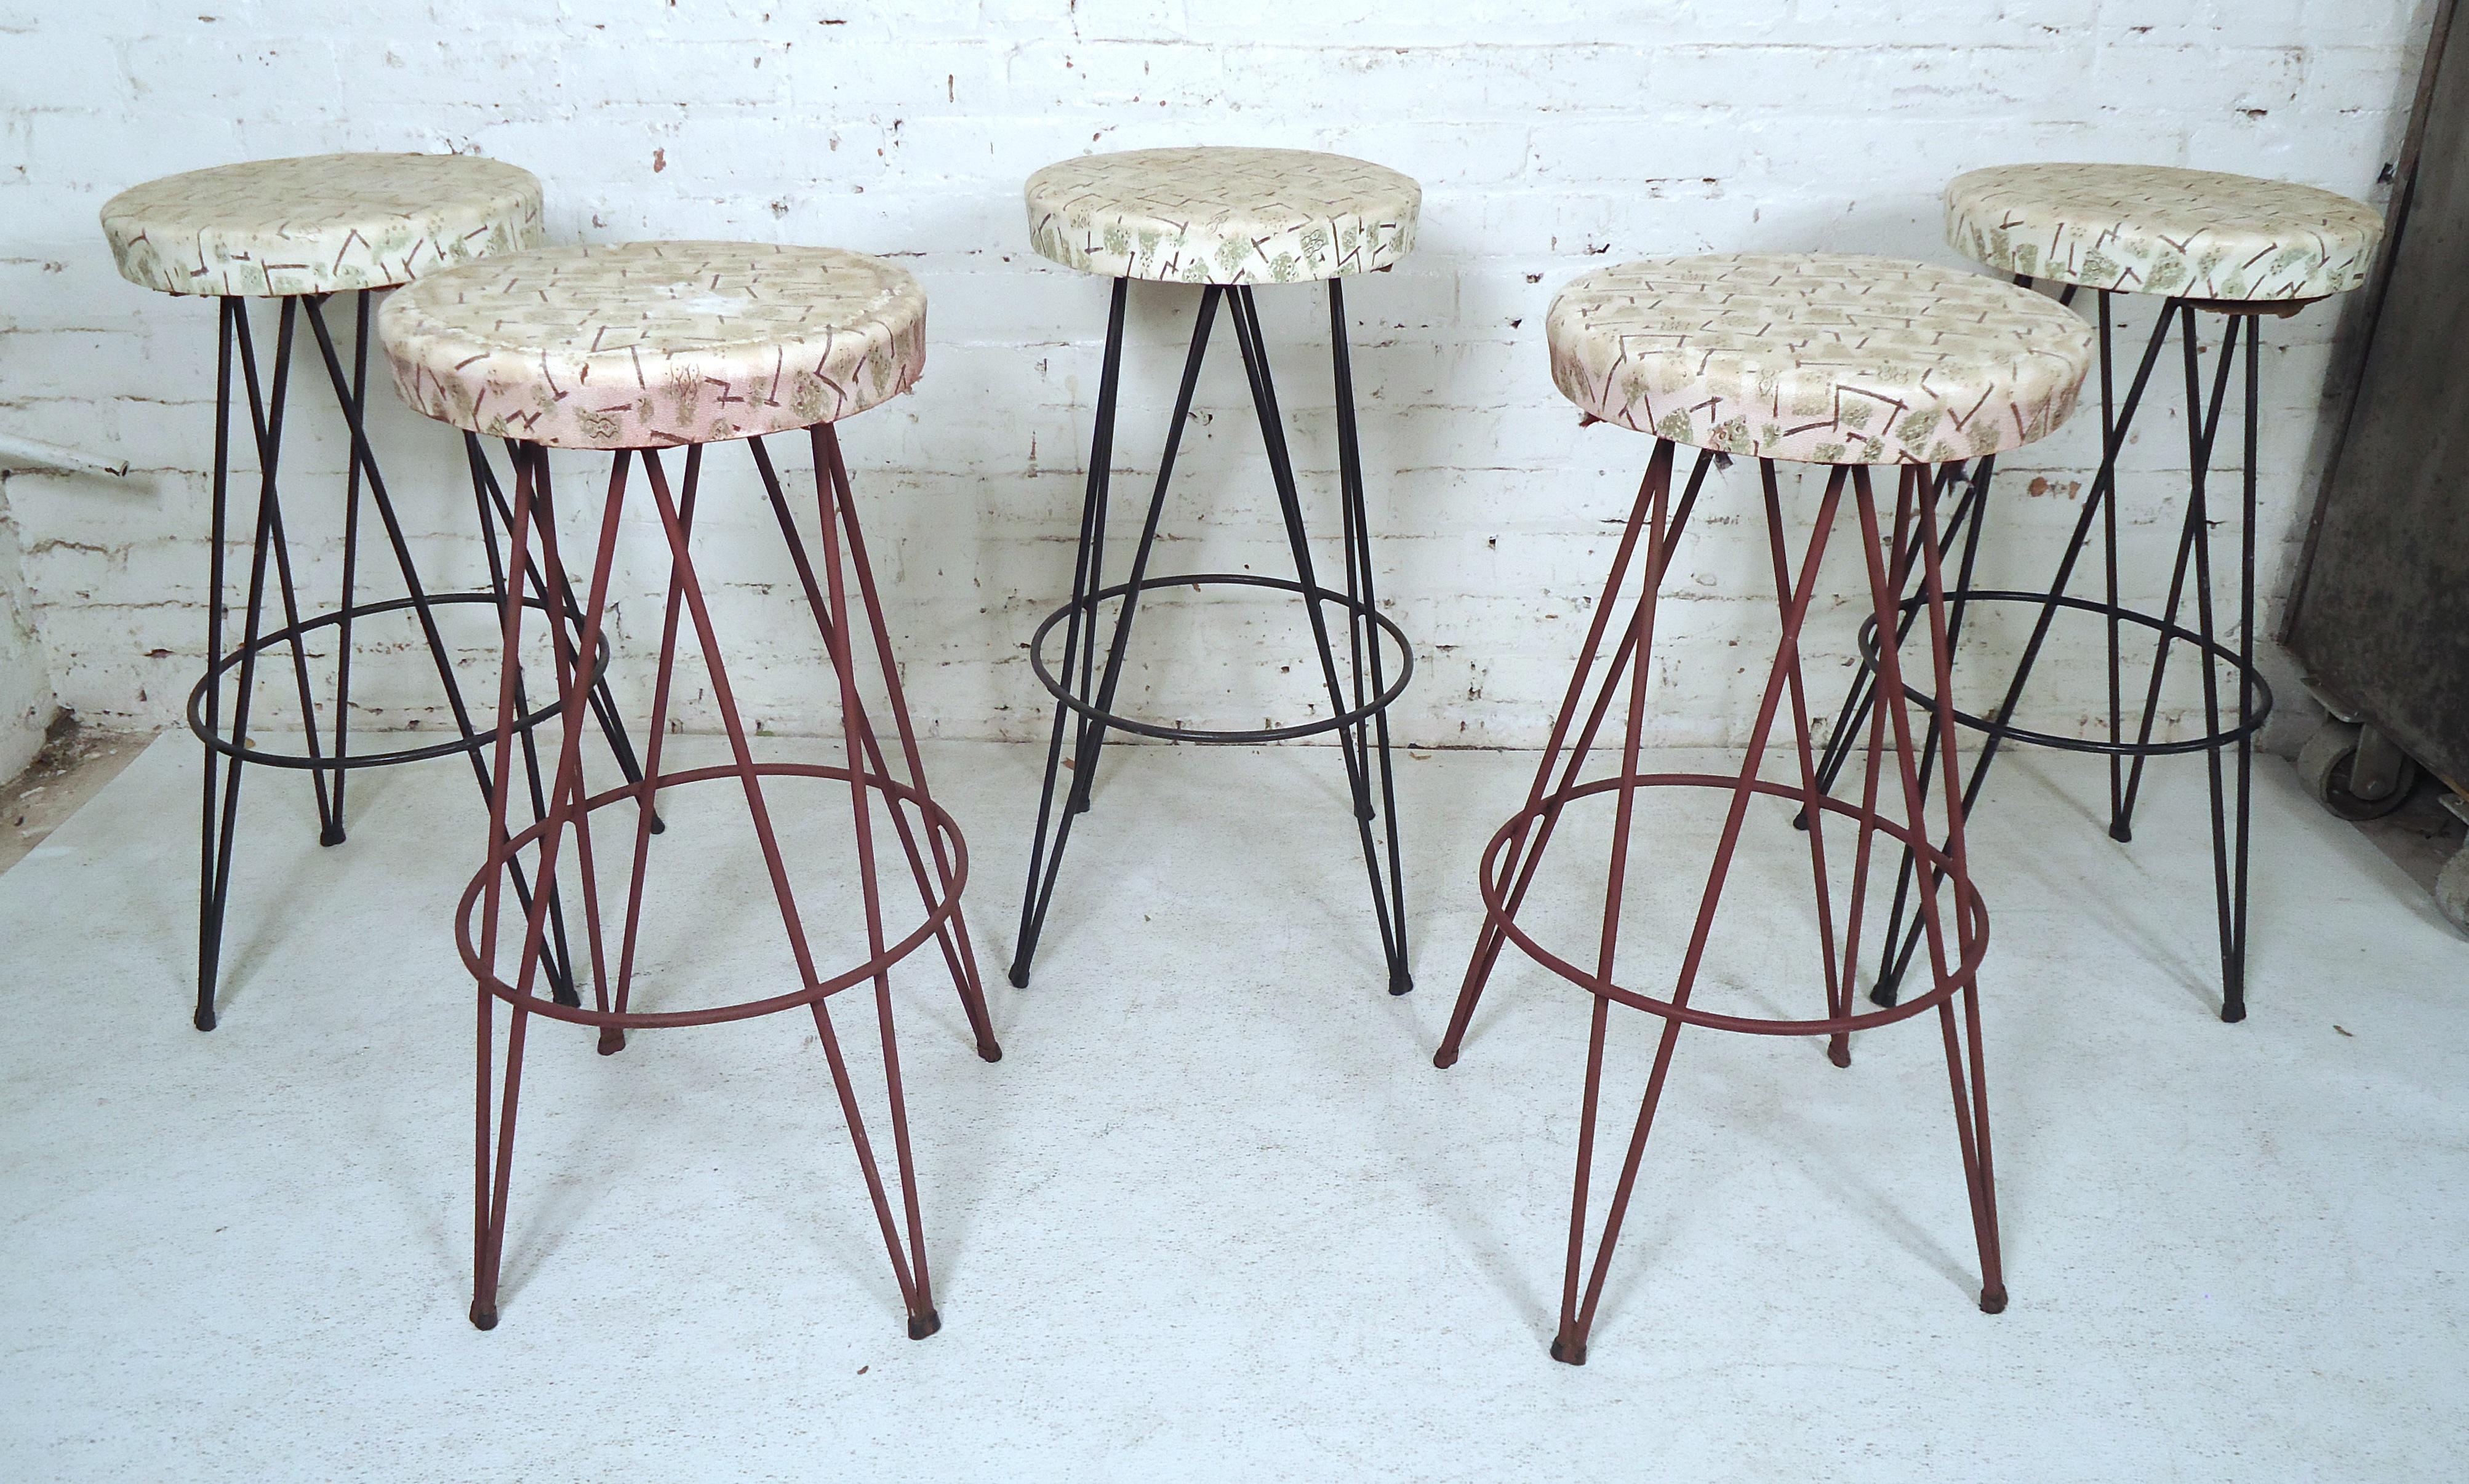 2 bar RETRO 70's VINTAGE STEEL HAIRPIN TABLE LEGS INDUSTRIAL EAMES STYLE 